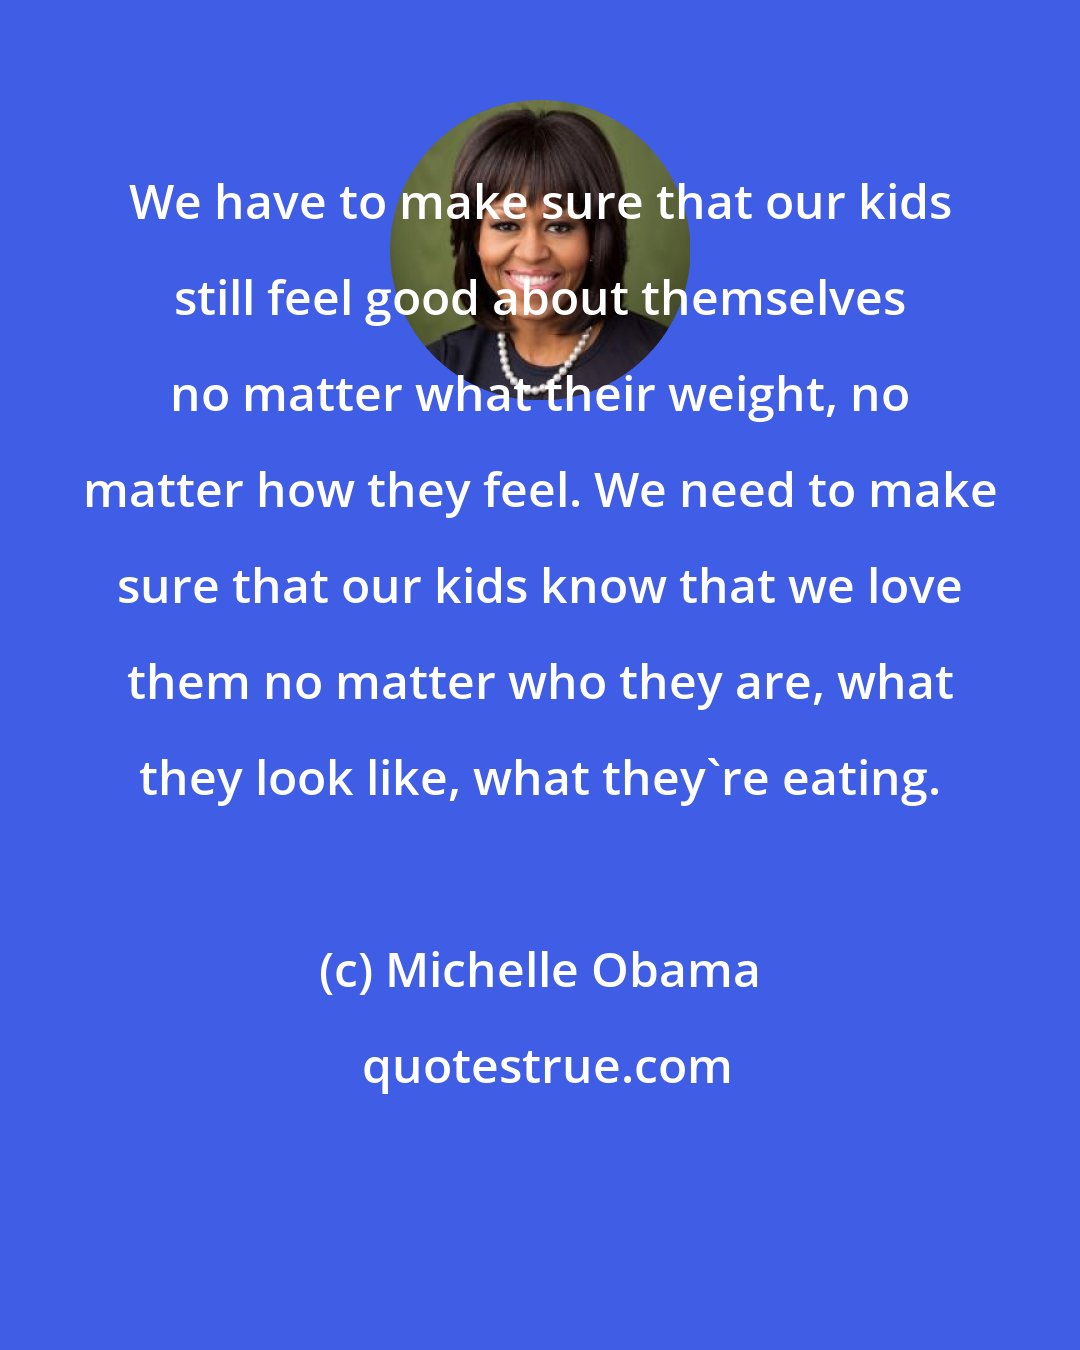 Michelle Obama: We have to make sure that our kids still feel good about themselves no matter what their weight, no matter how they feel. We need to make sure that our kids know that we love them no matter who they are, what they look like, what they're eating.